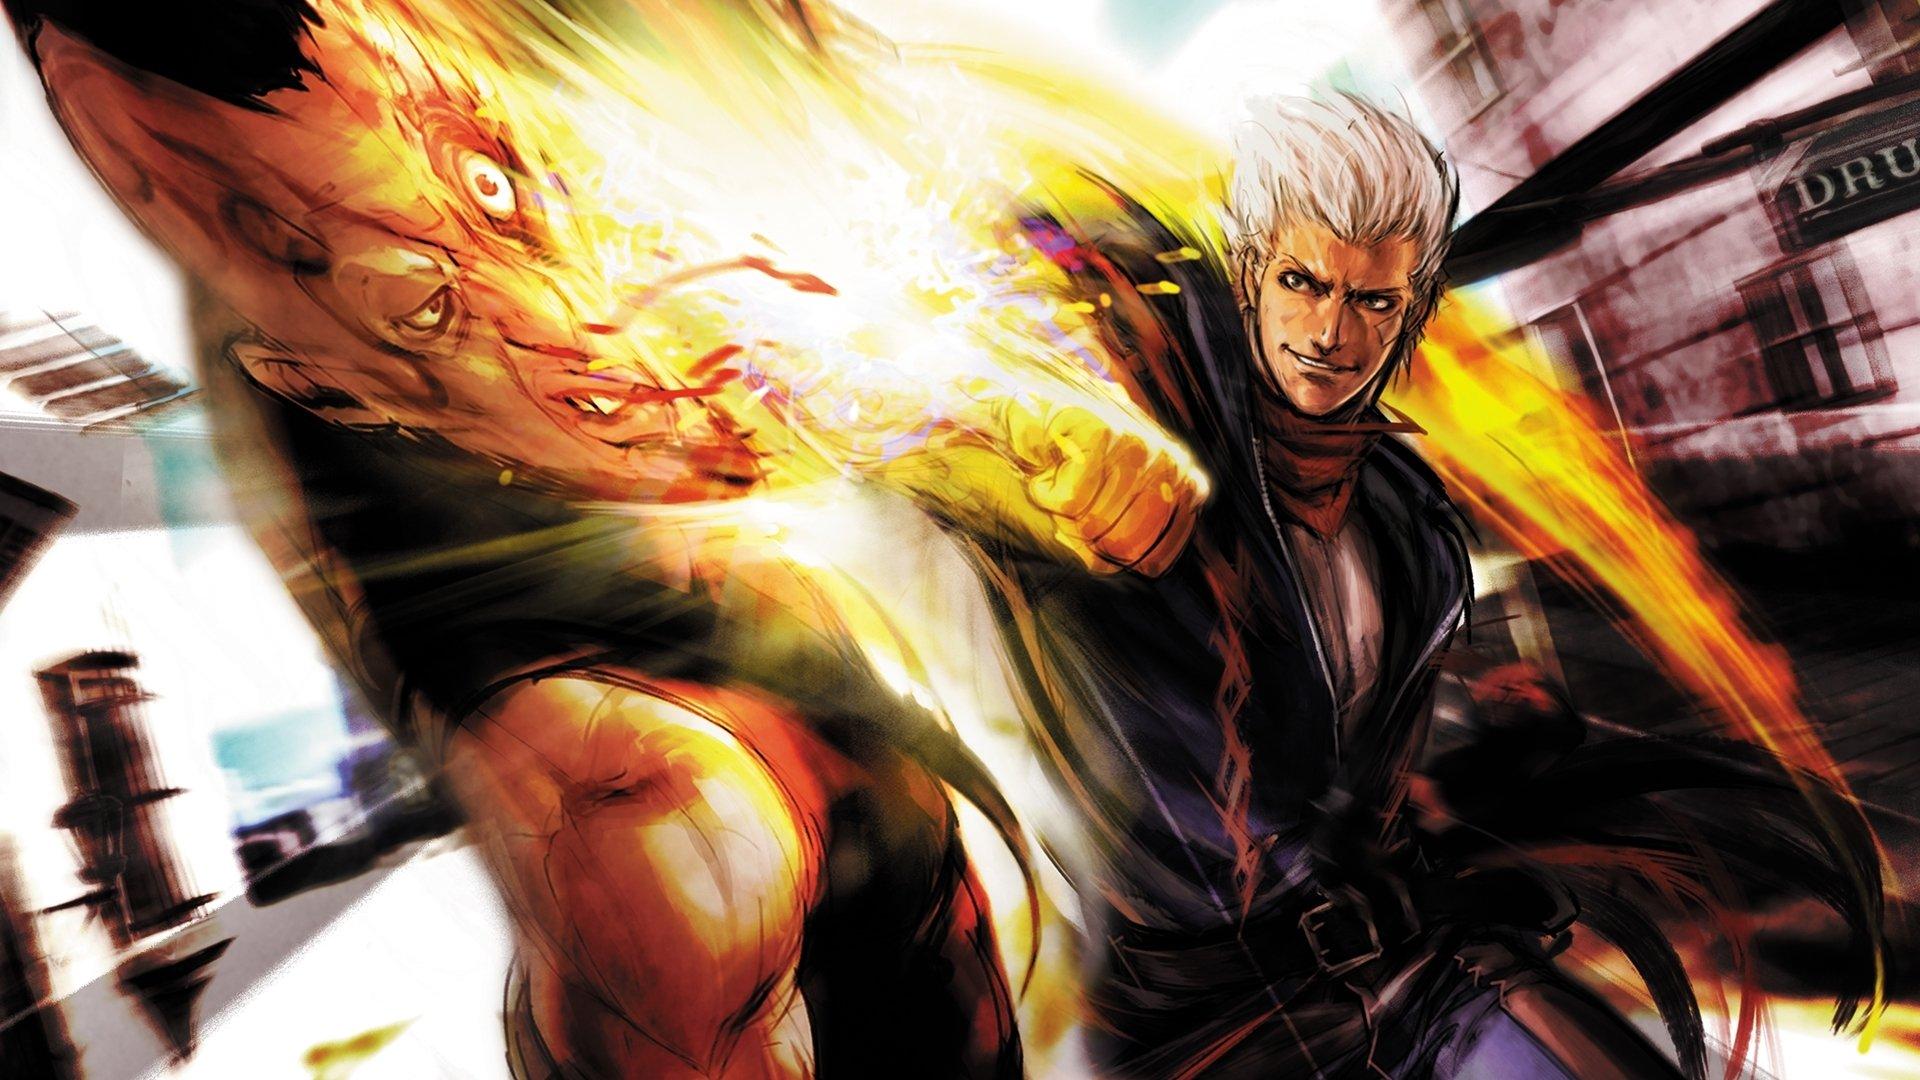 god hand game for pc download